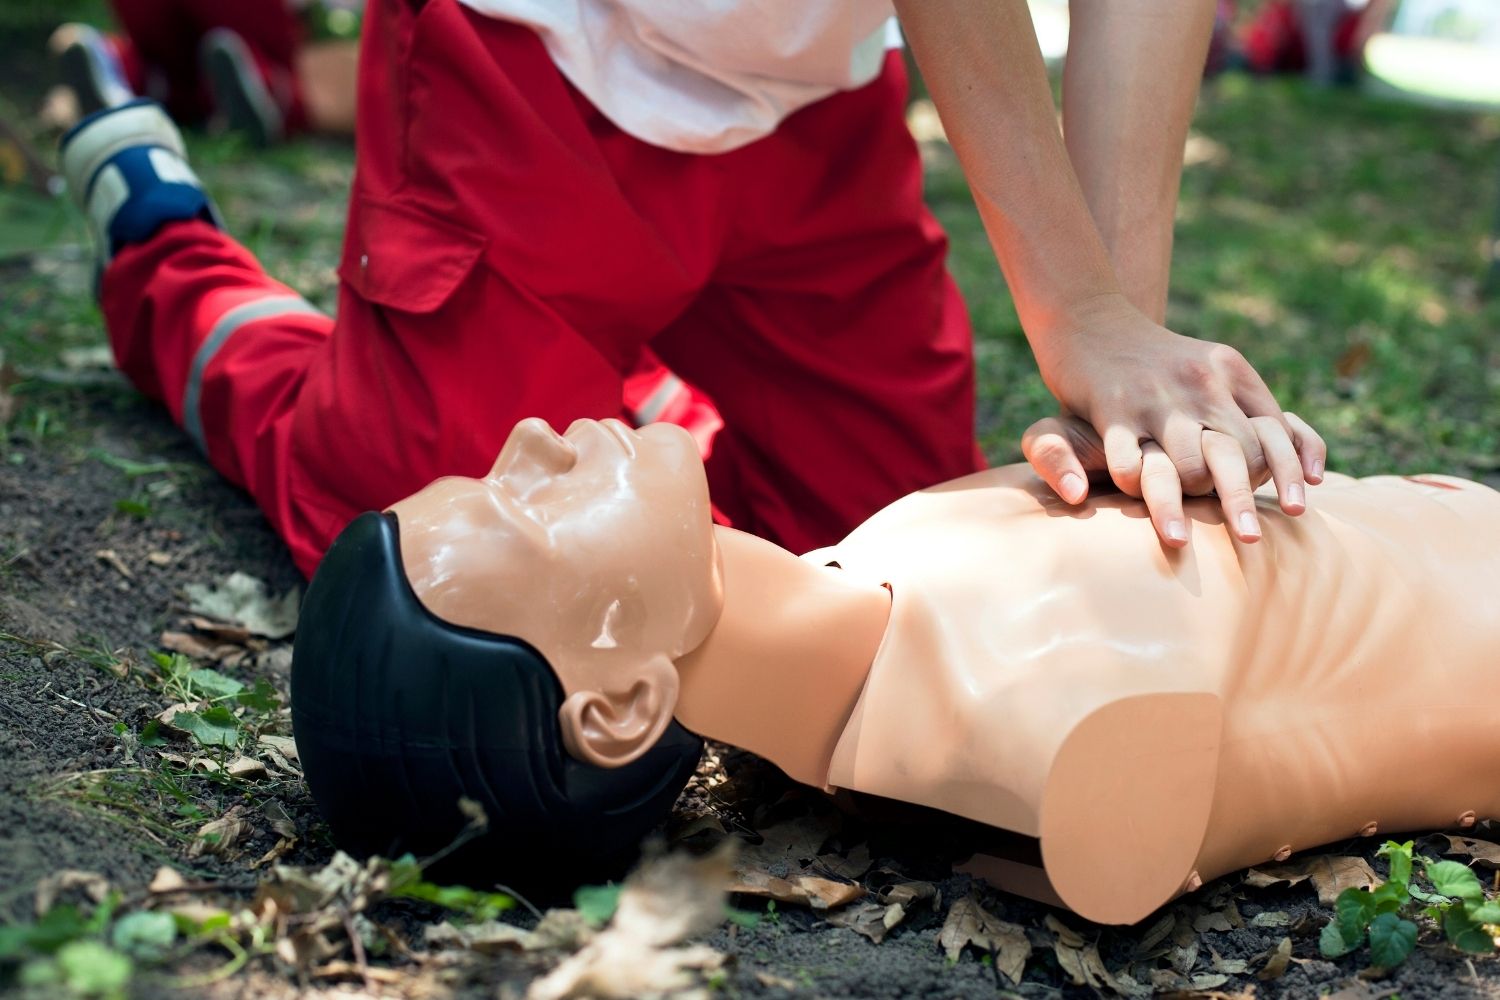 BLS-AED  Basic Life Support & Défibrillation